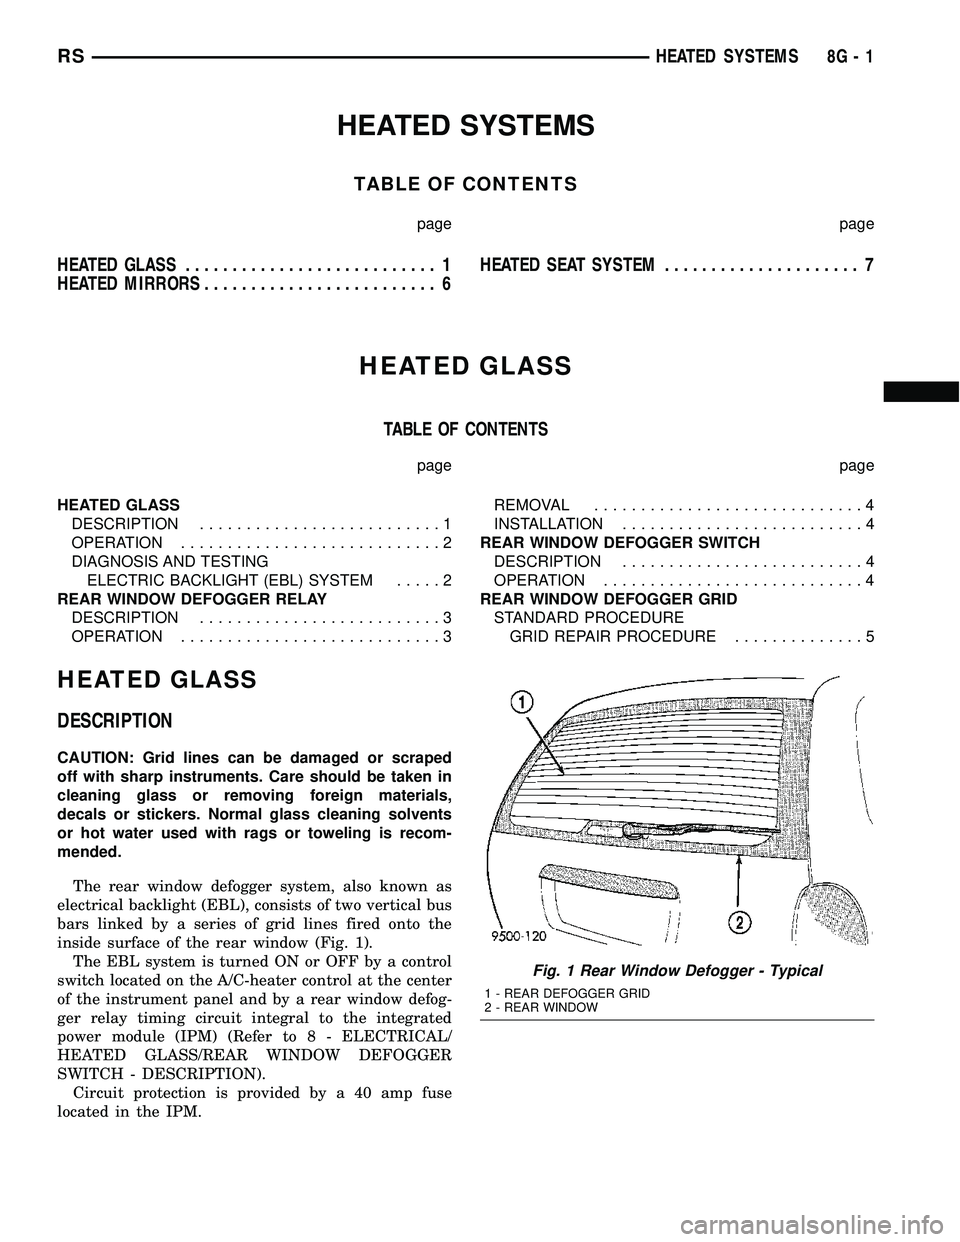 CHRYSLER VOYAGER 2005  Service Manual HEATED SYSTEMS
TABLE OF CONTENTS
page page
HEATED GLASS........................... 1
HEATED MIRRORS......................... 6HEATED SEAT SYSTEM..................... 7
HEATED GLASS
TABLE OF CONTENTS
p